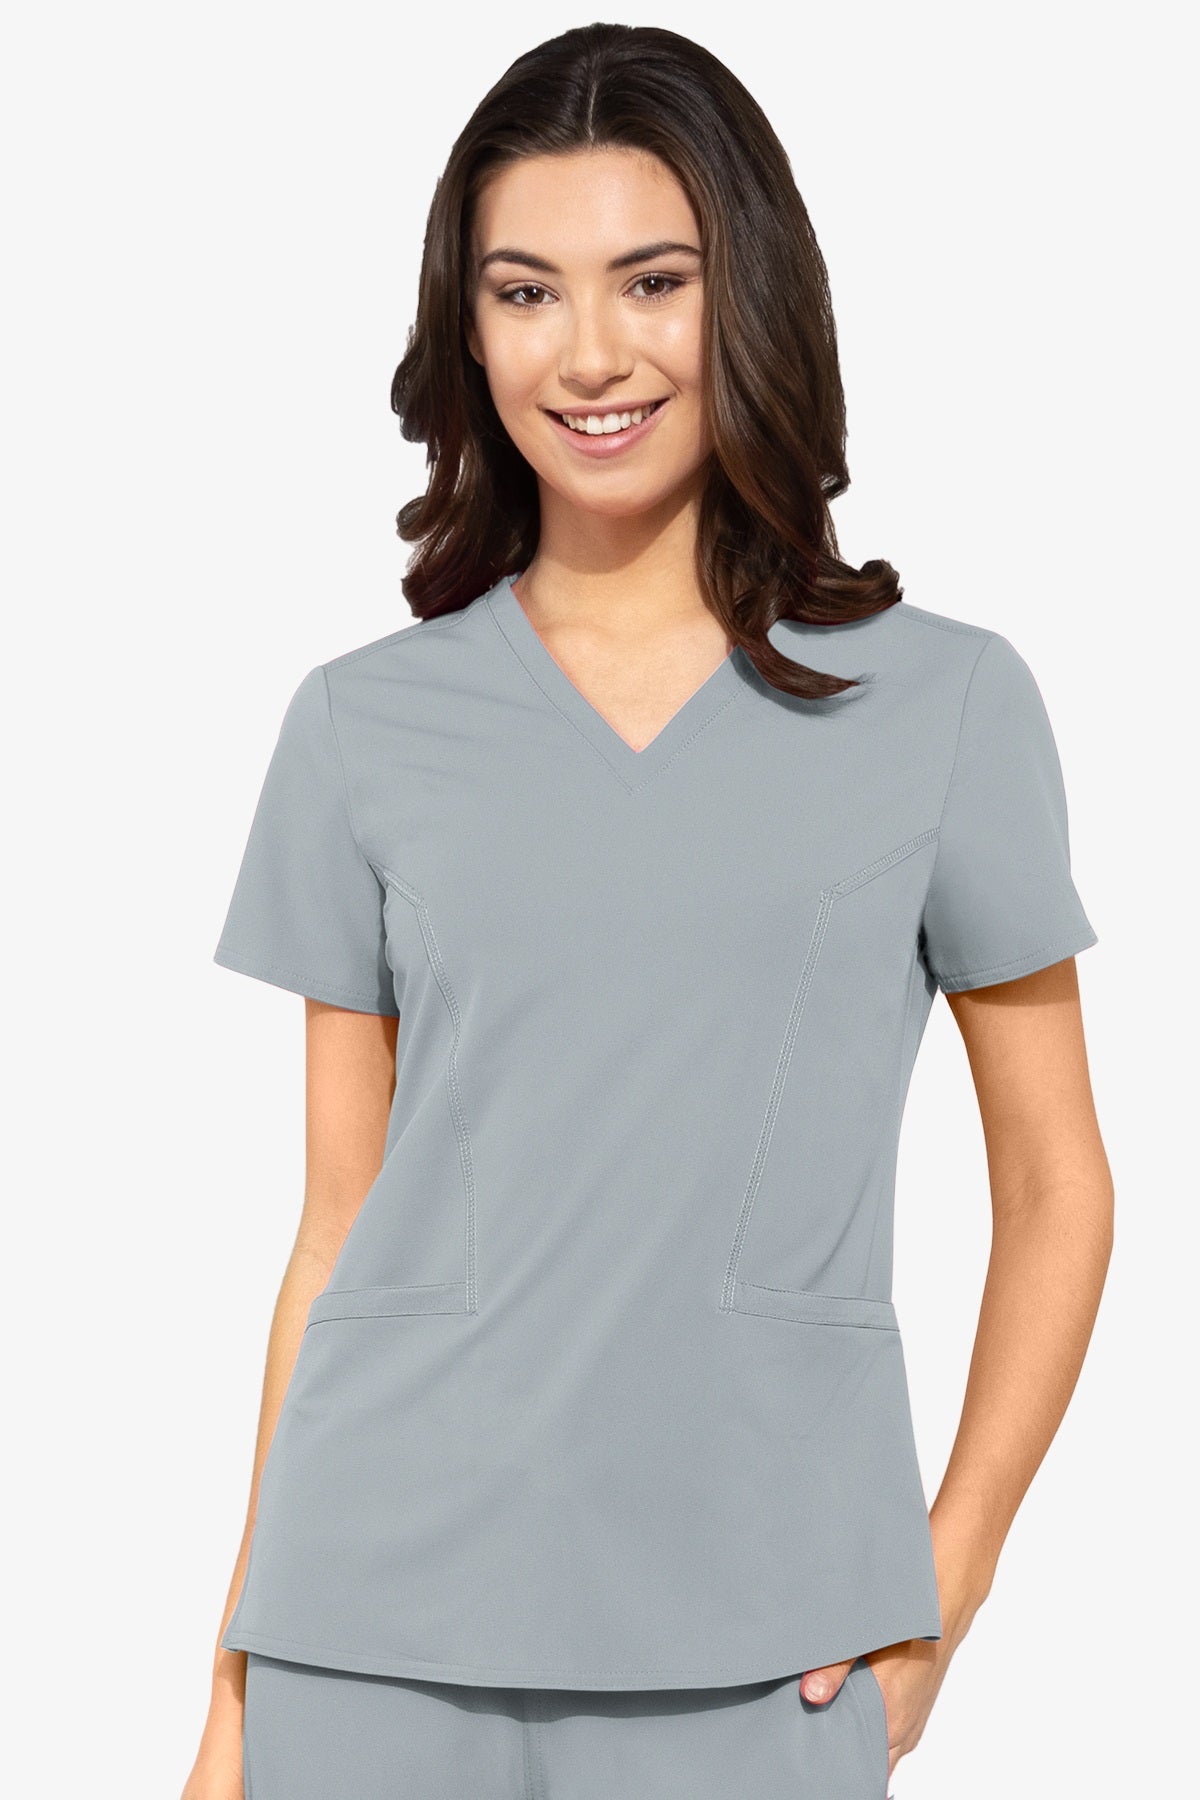 Med Couture Scrub Top Peaches Double V-Neck in Cloud at Parker's Clothing and Shoes